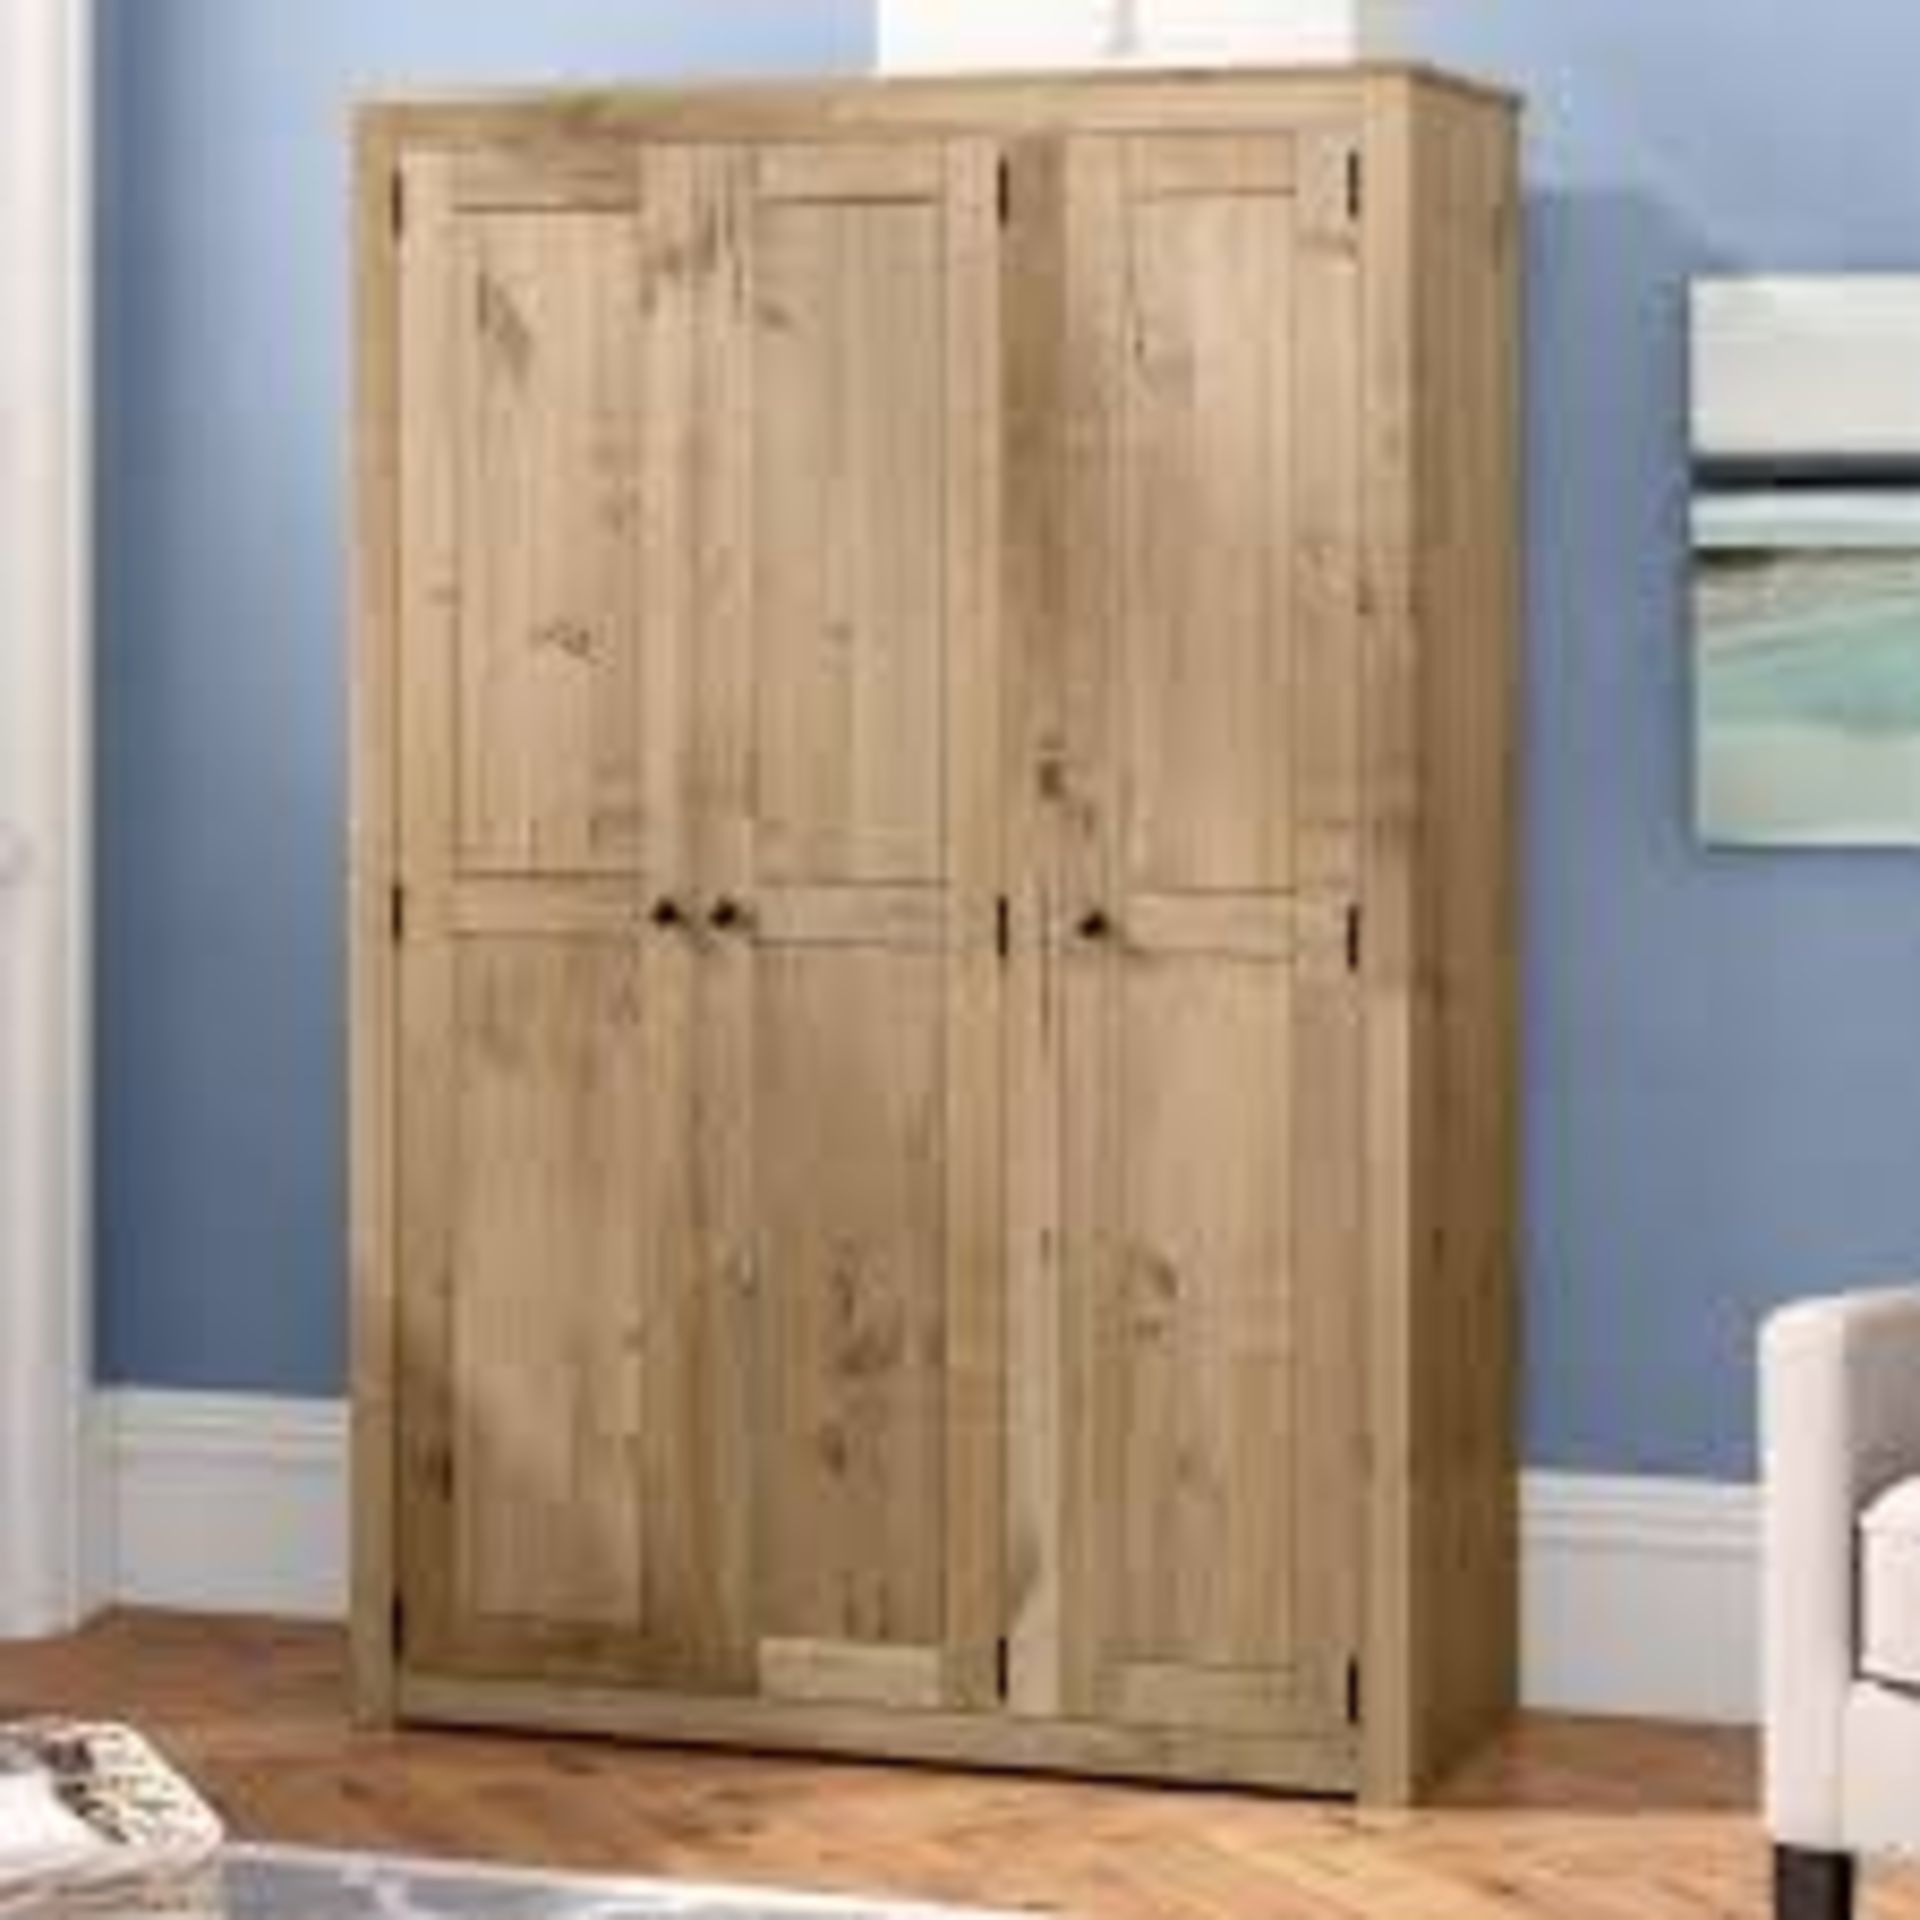 Boxed Alpen Home Vida Wardrobe RRP £210 (18491) (Pictures are for illustration purposes only) (